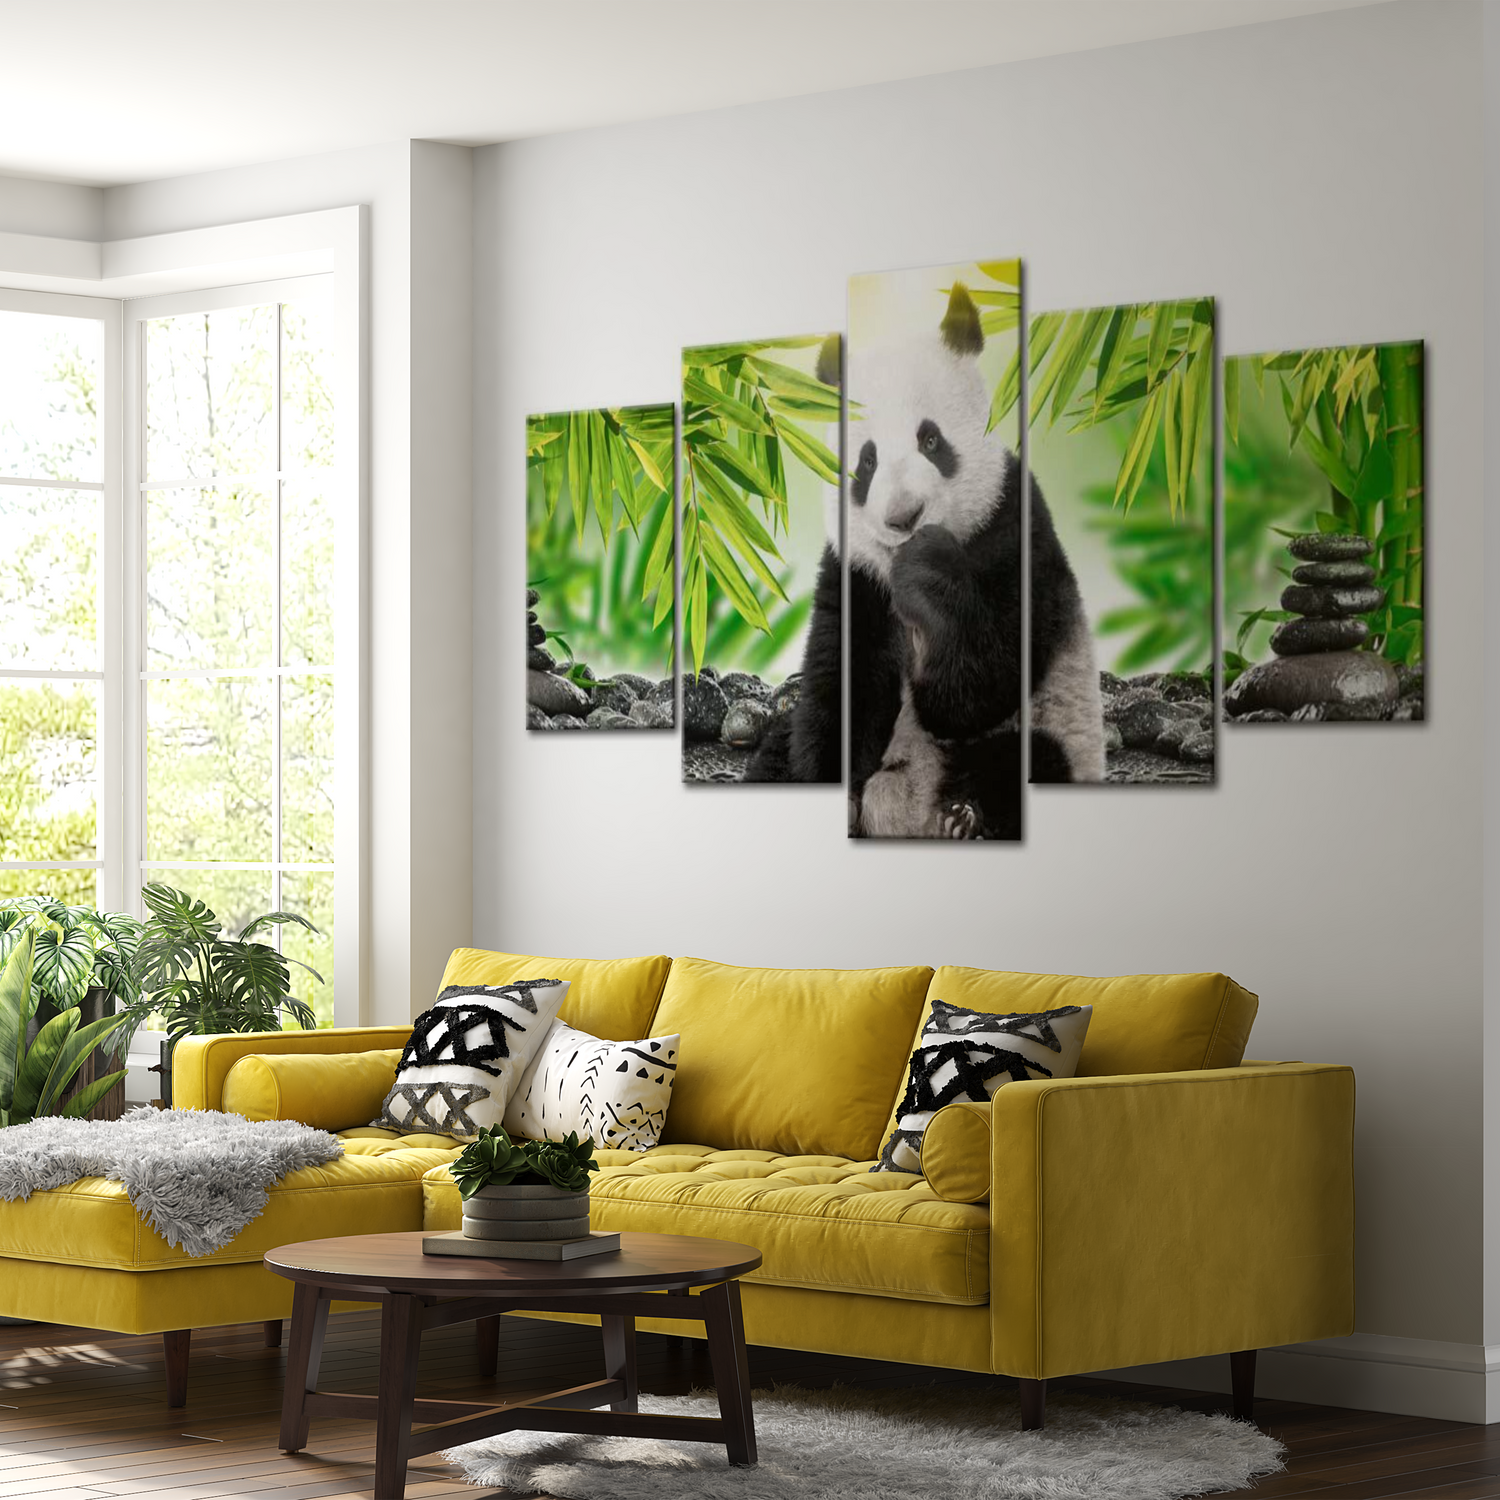 Stretched Canvas Animal Art - Sweet Little Panda 40"Wx20"H